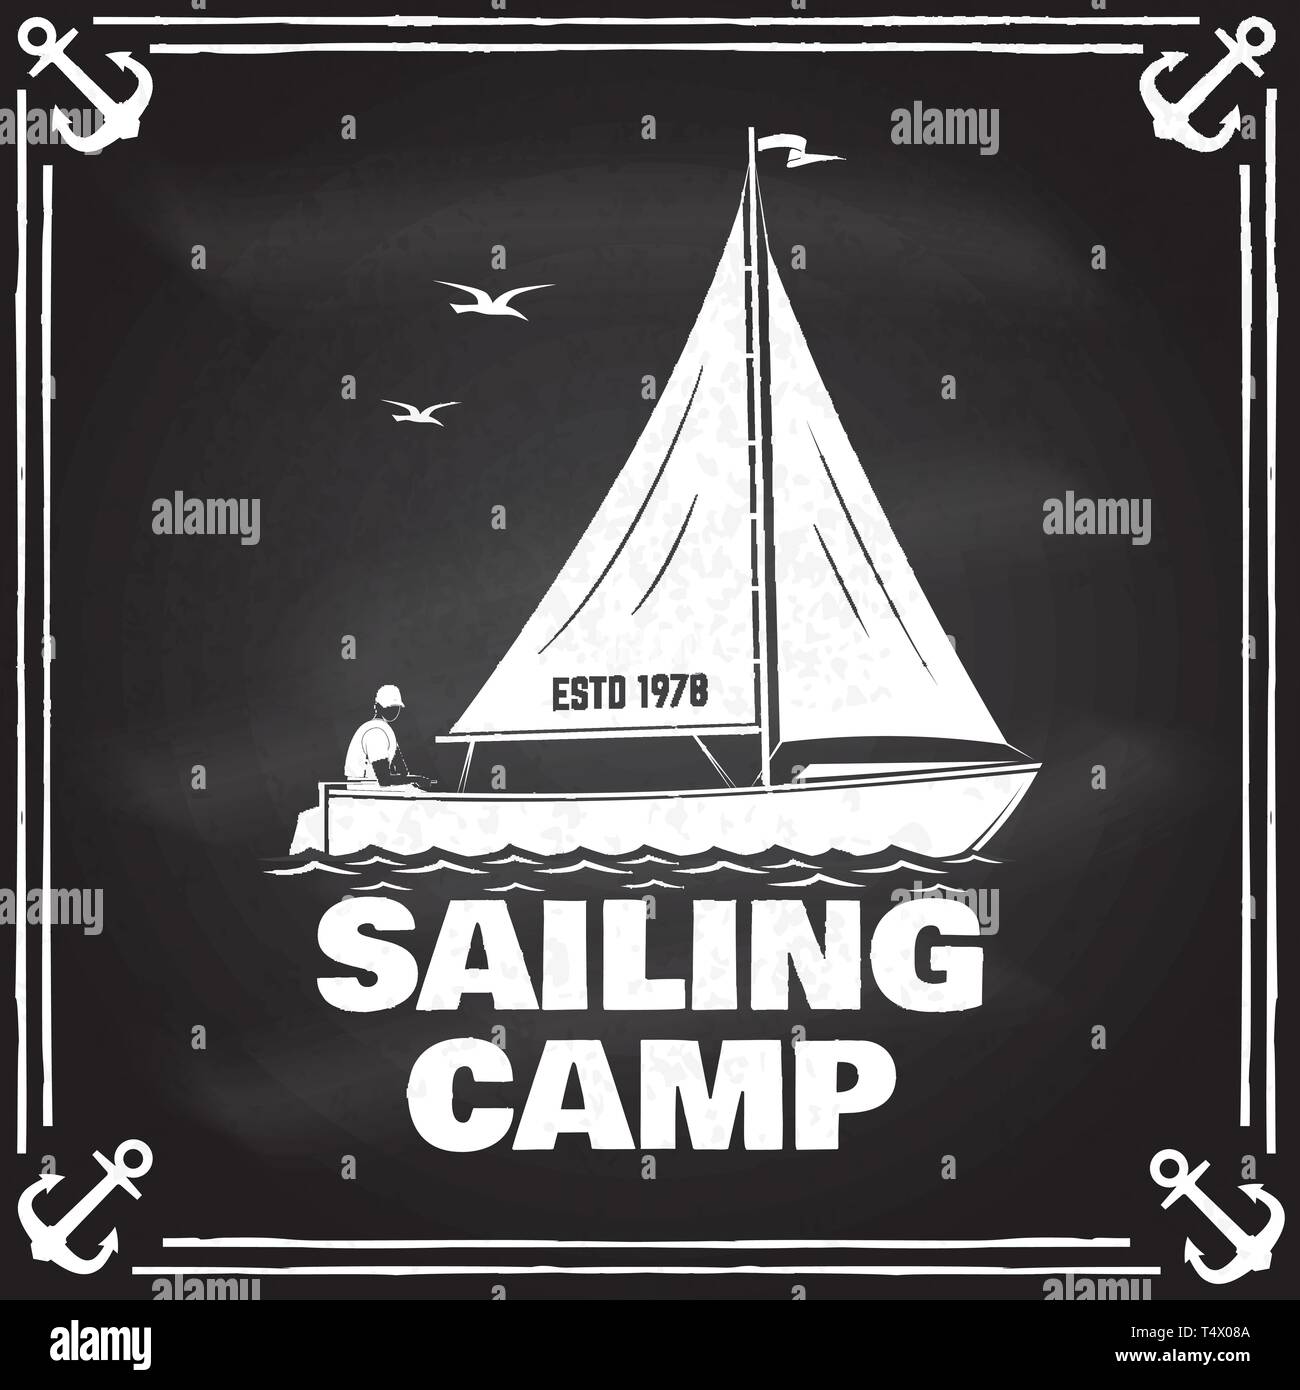 Sailing camp badge. Vector illustration on the chalkboard. Concept for shirt, print, stamp or tee. Vintage typography design with man in sailboats silhouette. Sailing on boat. Ocean adventure. Stock Vector